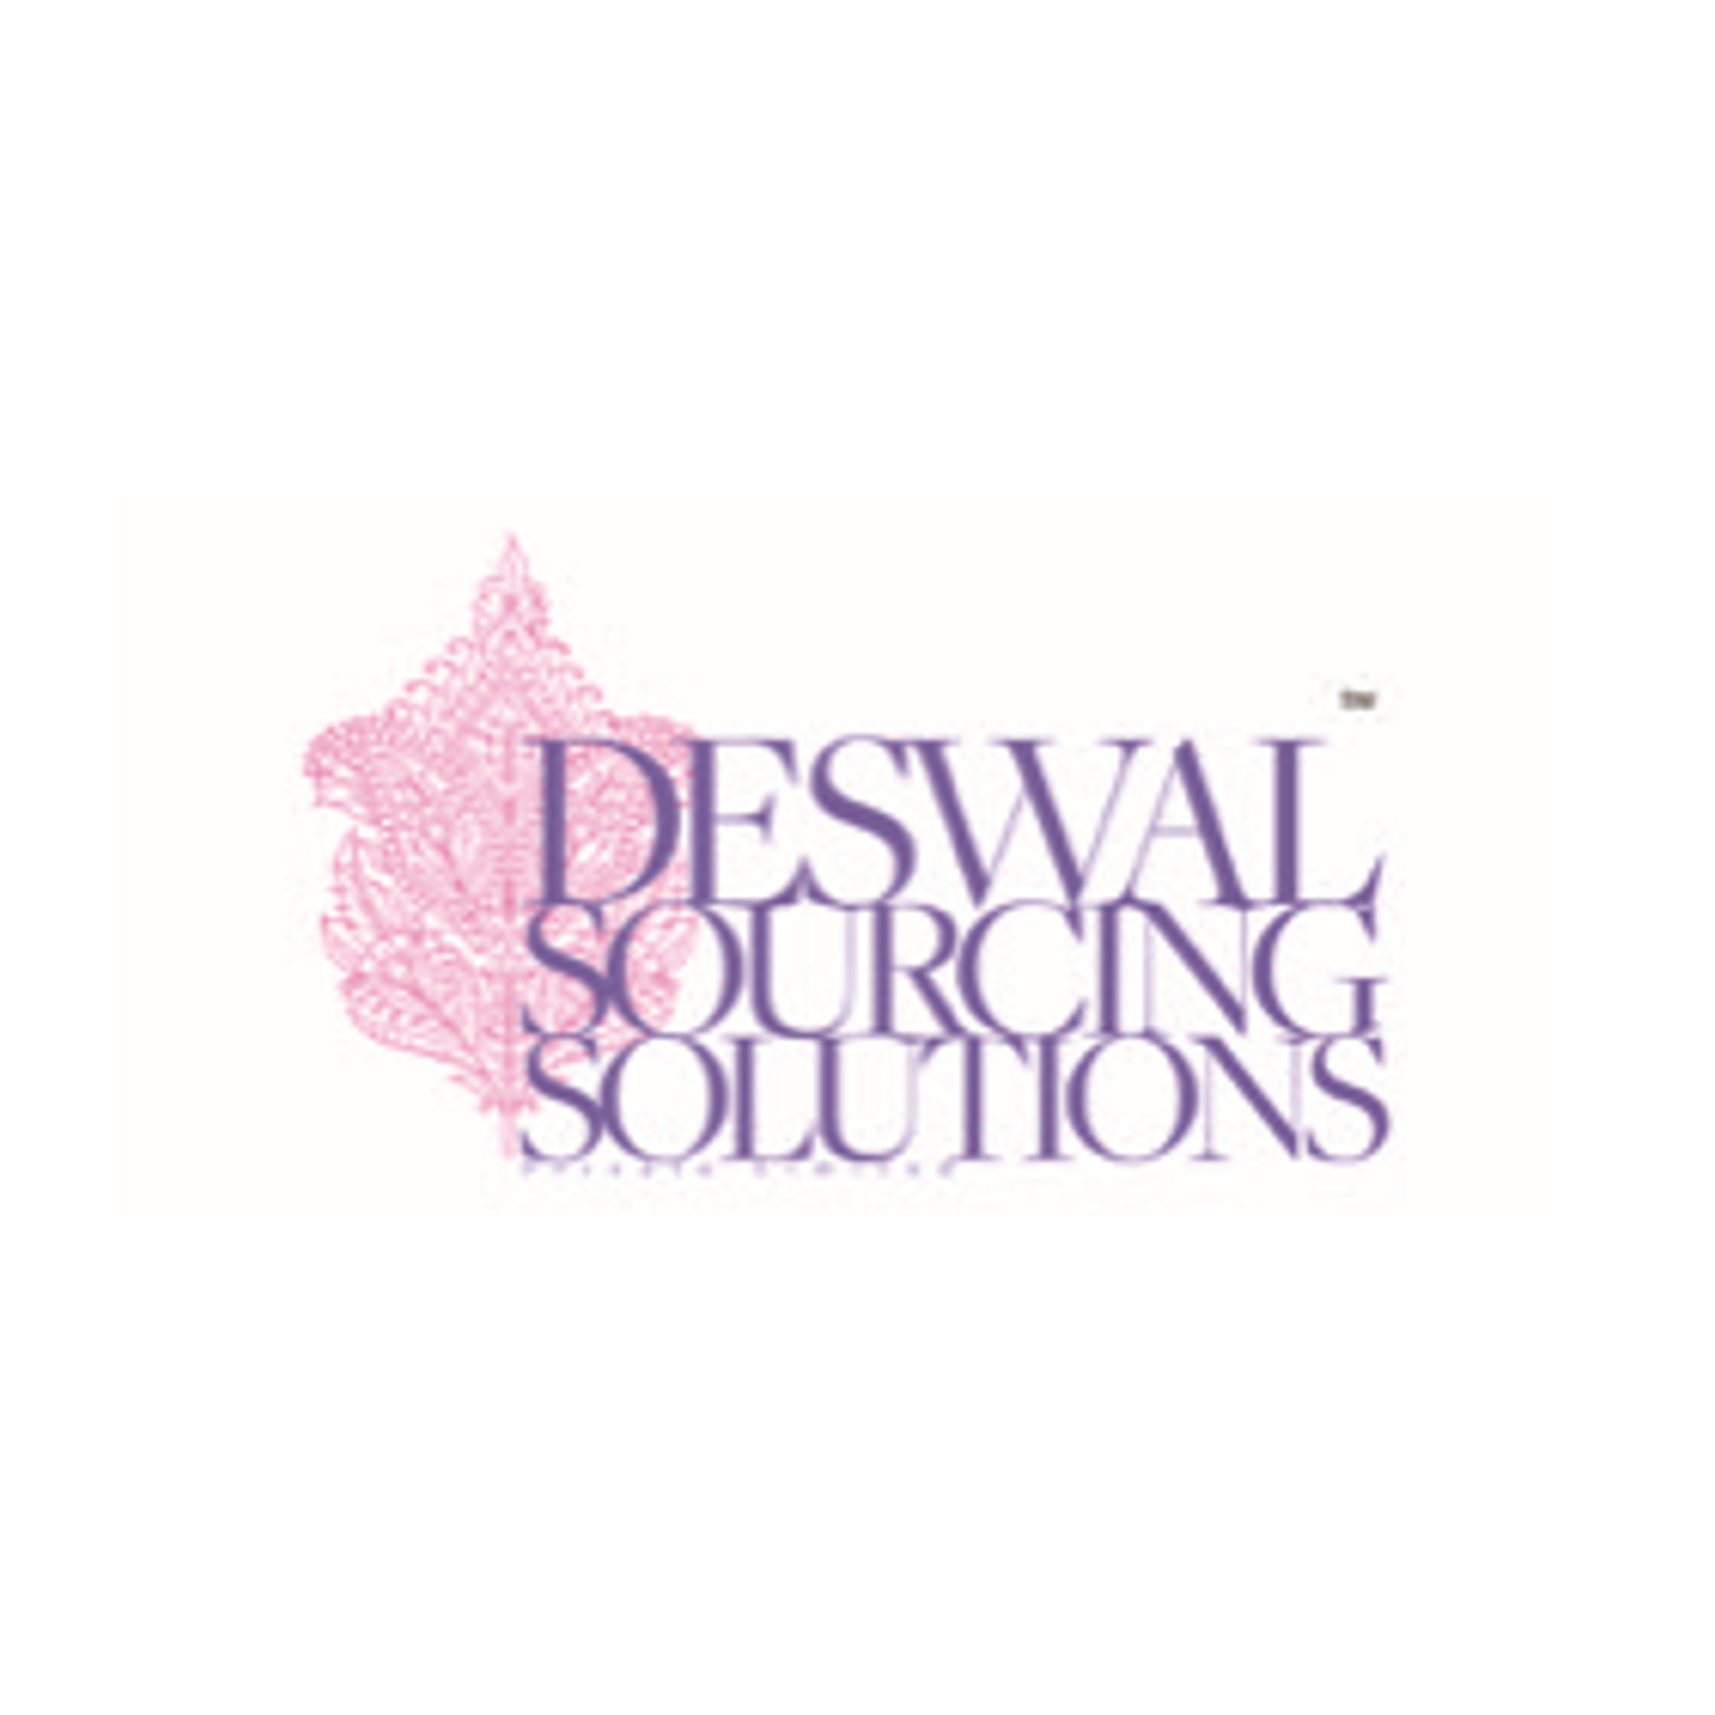 Deswal Sourcing Solutions